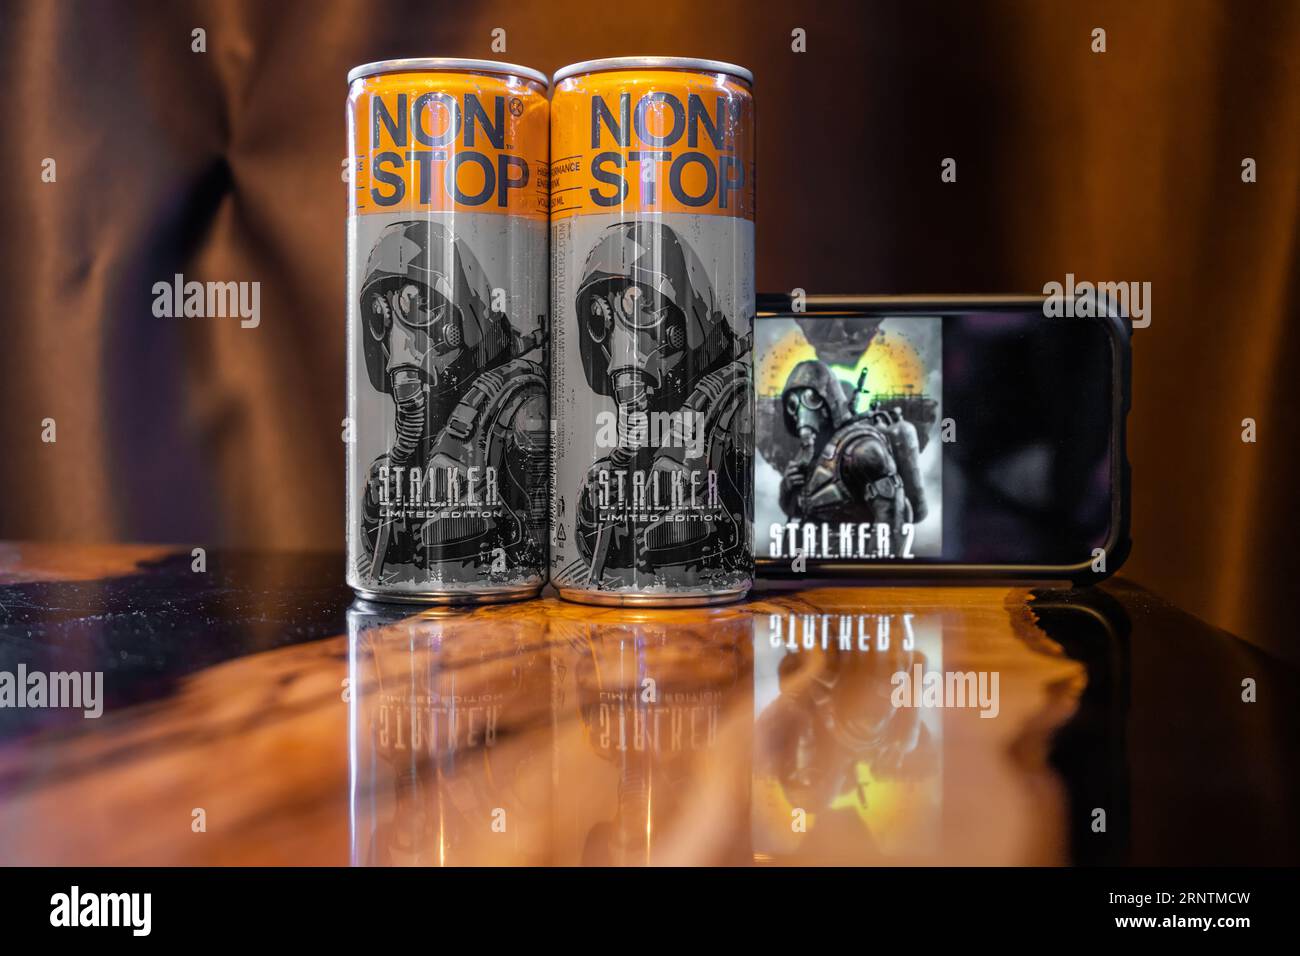 NON STOP STALKER Limited Edition Empty Can Energy Drink 250ml. 2023 Ukraine